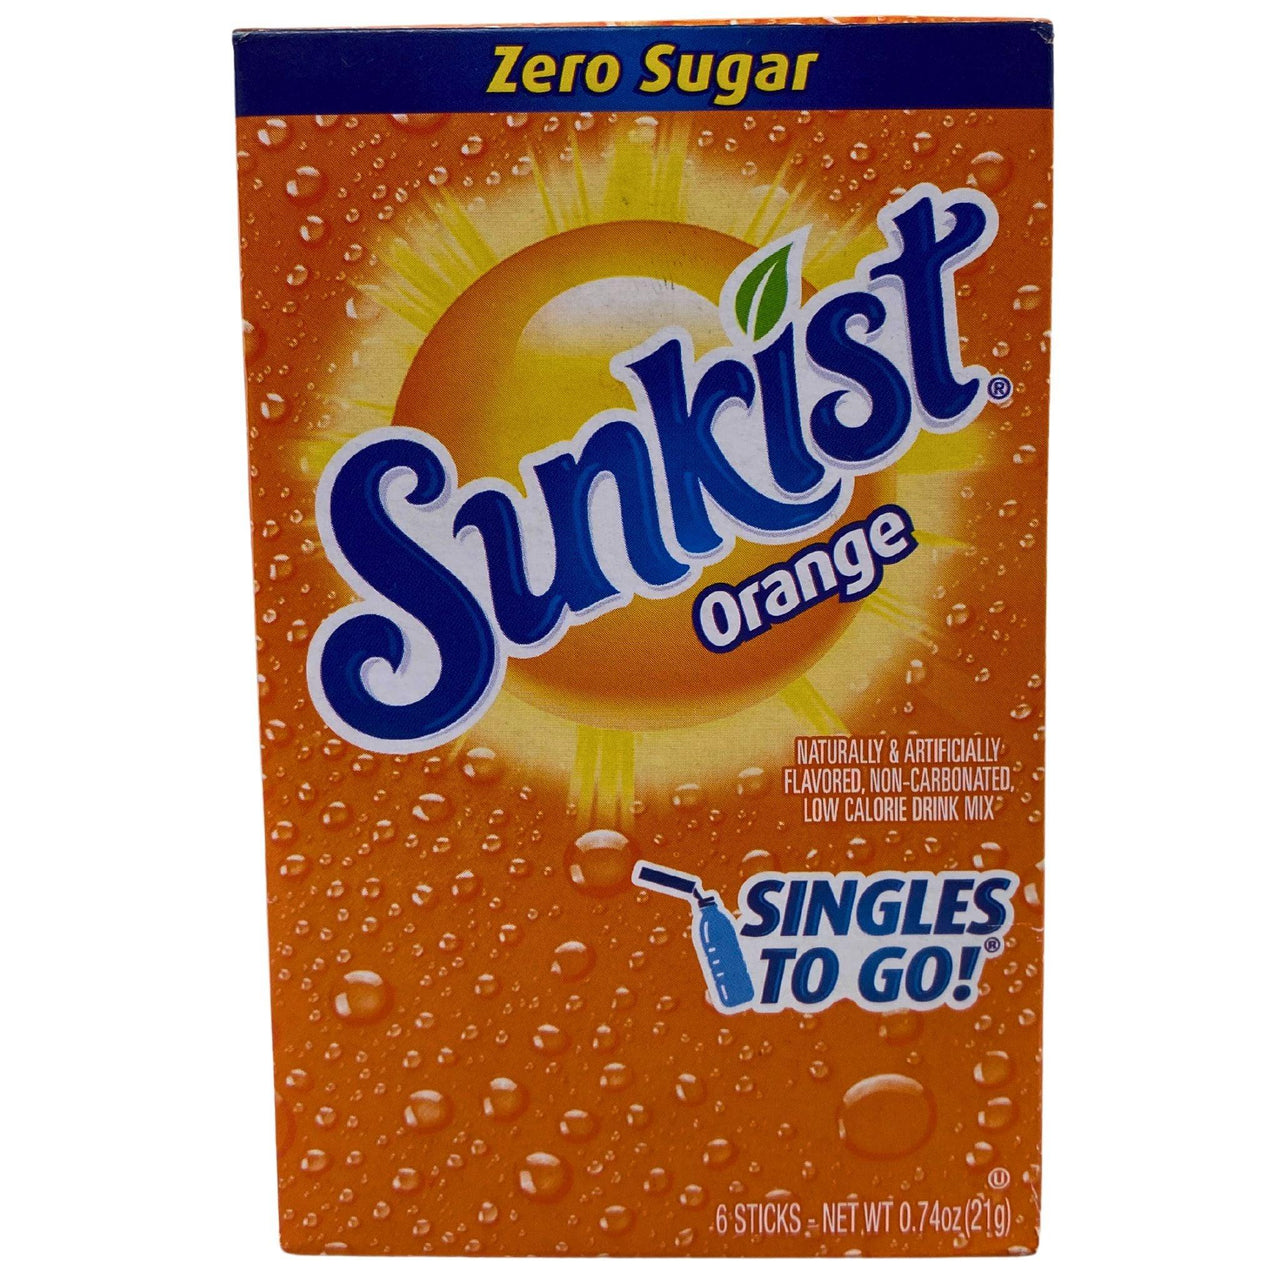 Sunkist Orange Zero Sugar Naturally Artificially Flavored , Non-Carbonated Low Calorie Drink Mix Singles To Go! 6 sticks (96 Pcs Lot) - Discount Wholesalers Inc